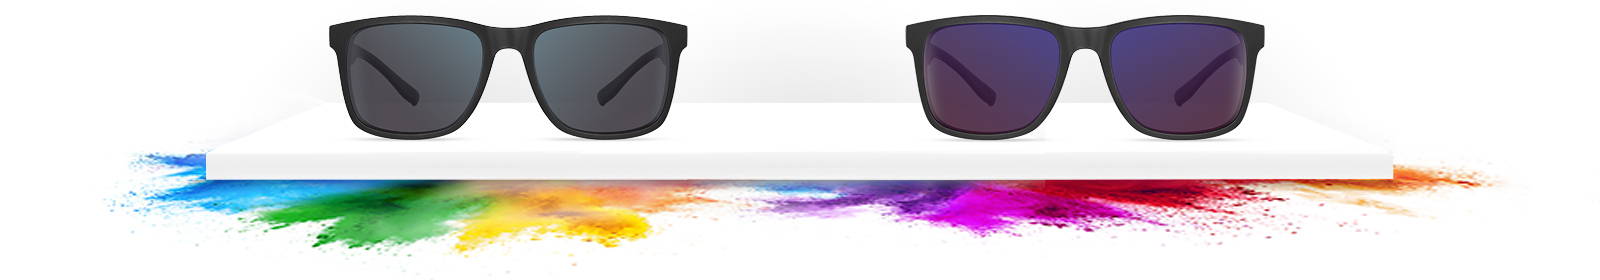 Two pairs of EnChroma  sunglasses for color blindness-- Tilden Cx3 Sun and Tilden Cx3 Sun SP models, displayed on a platform with colorful pattern beneath